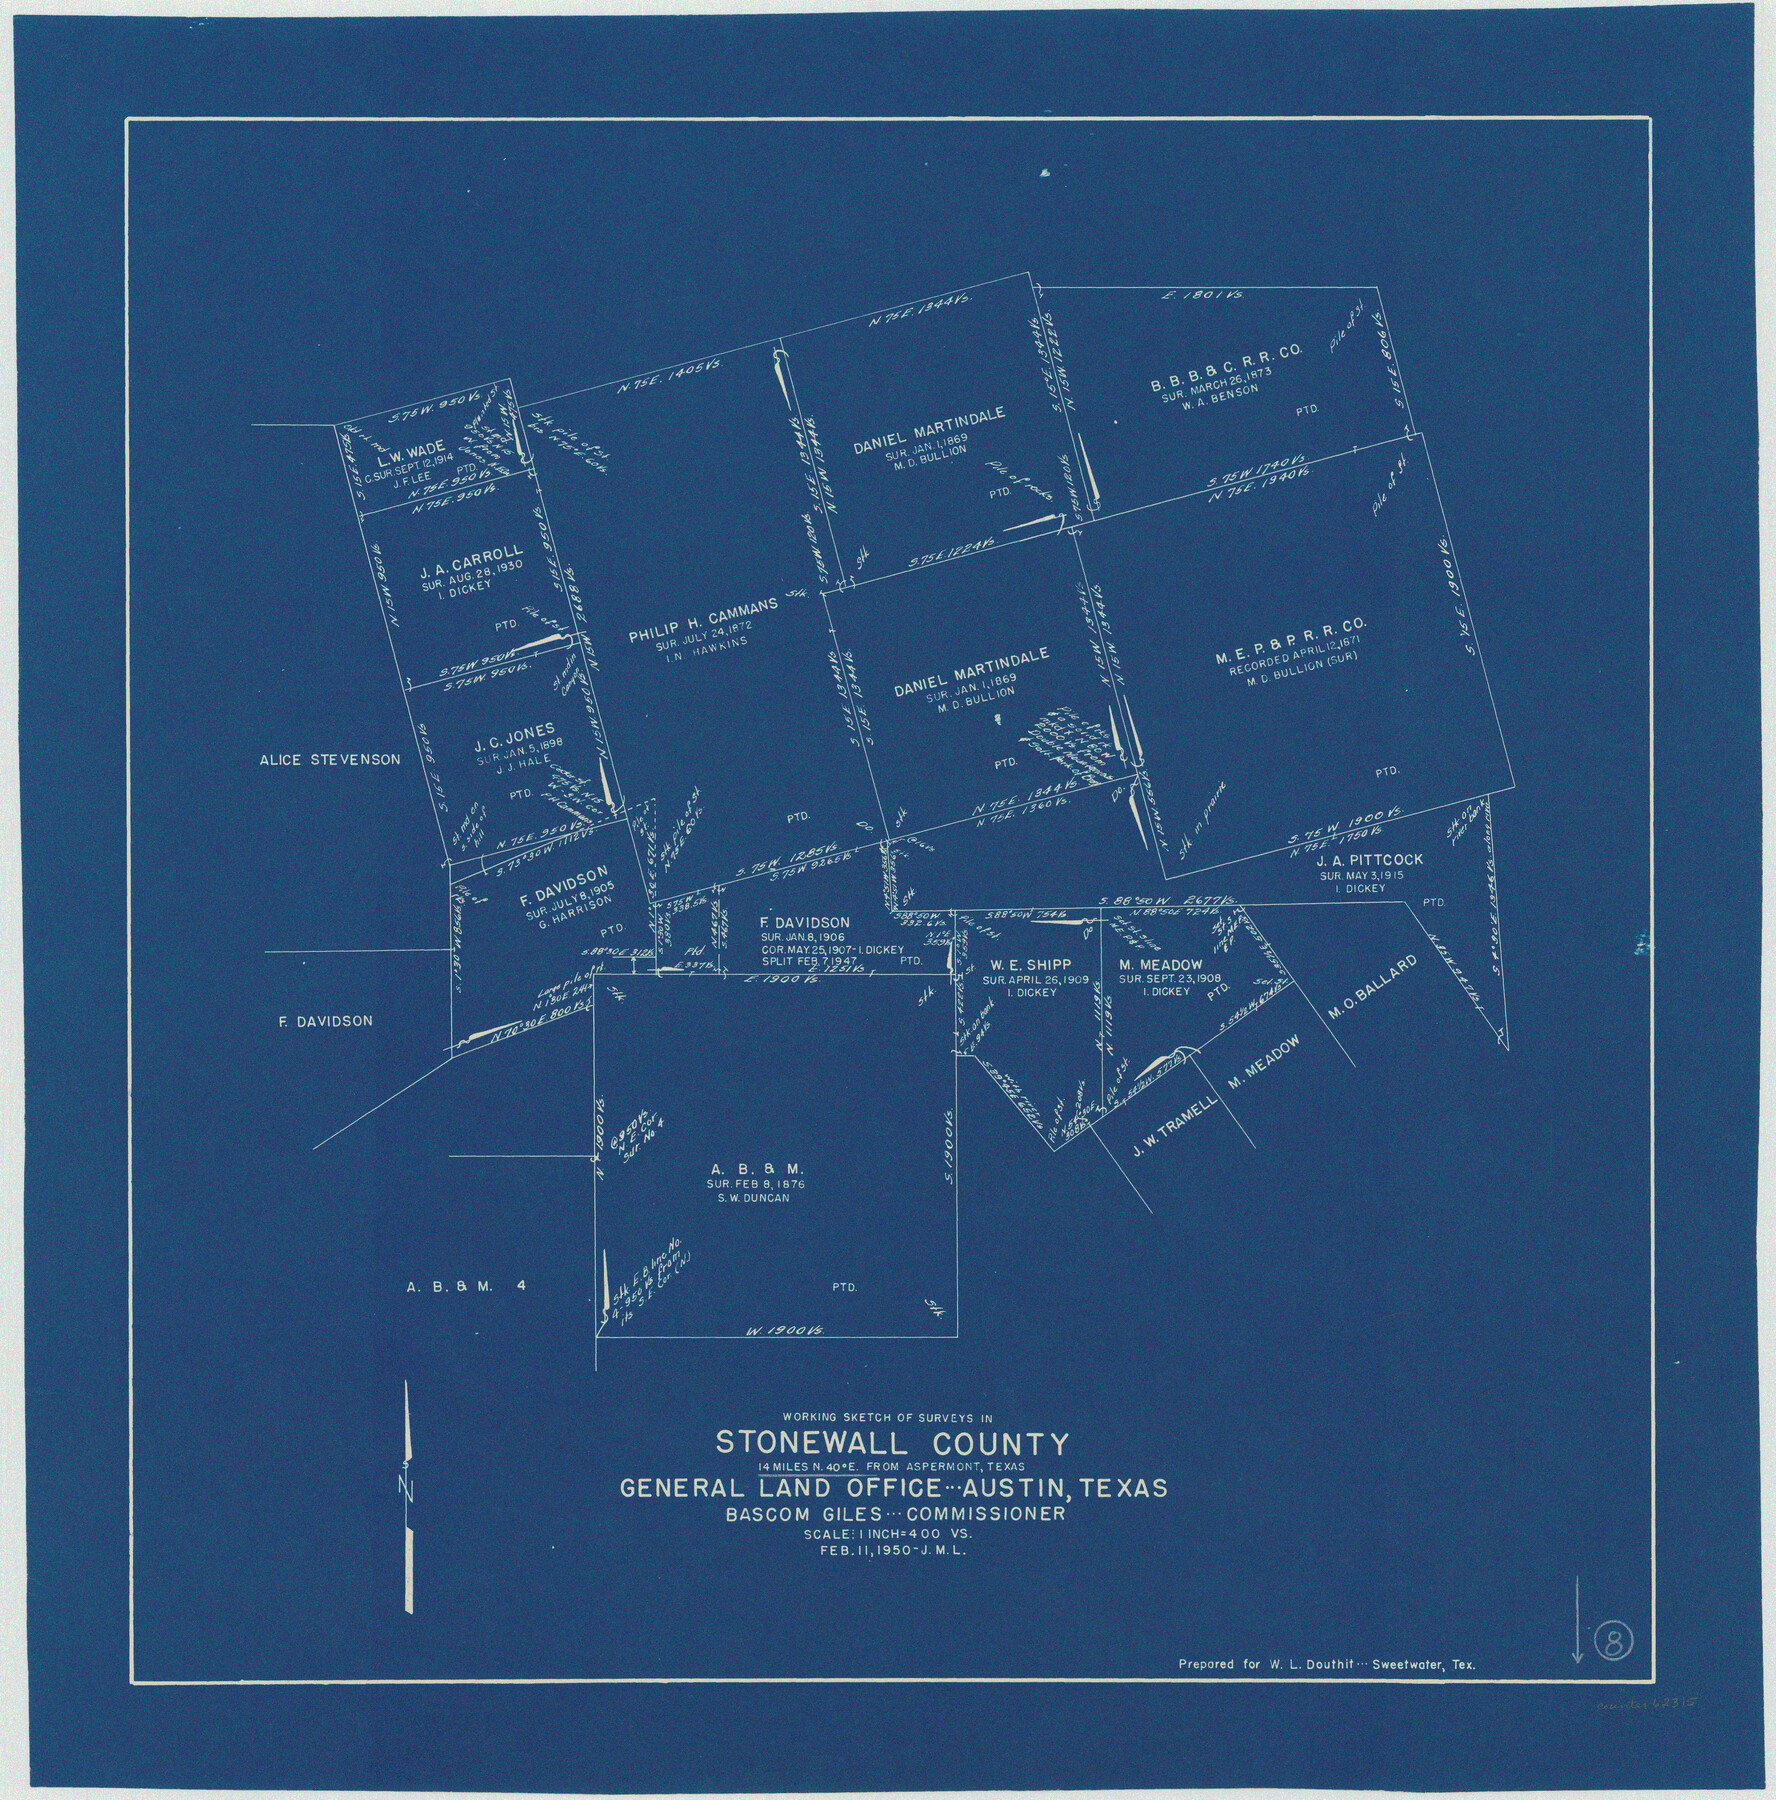 62315, Stonewall County Working Sketch 8, General Map Collection